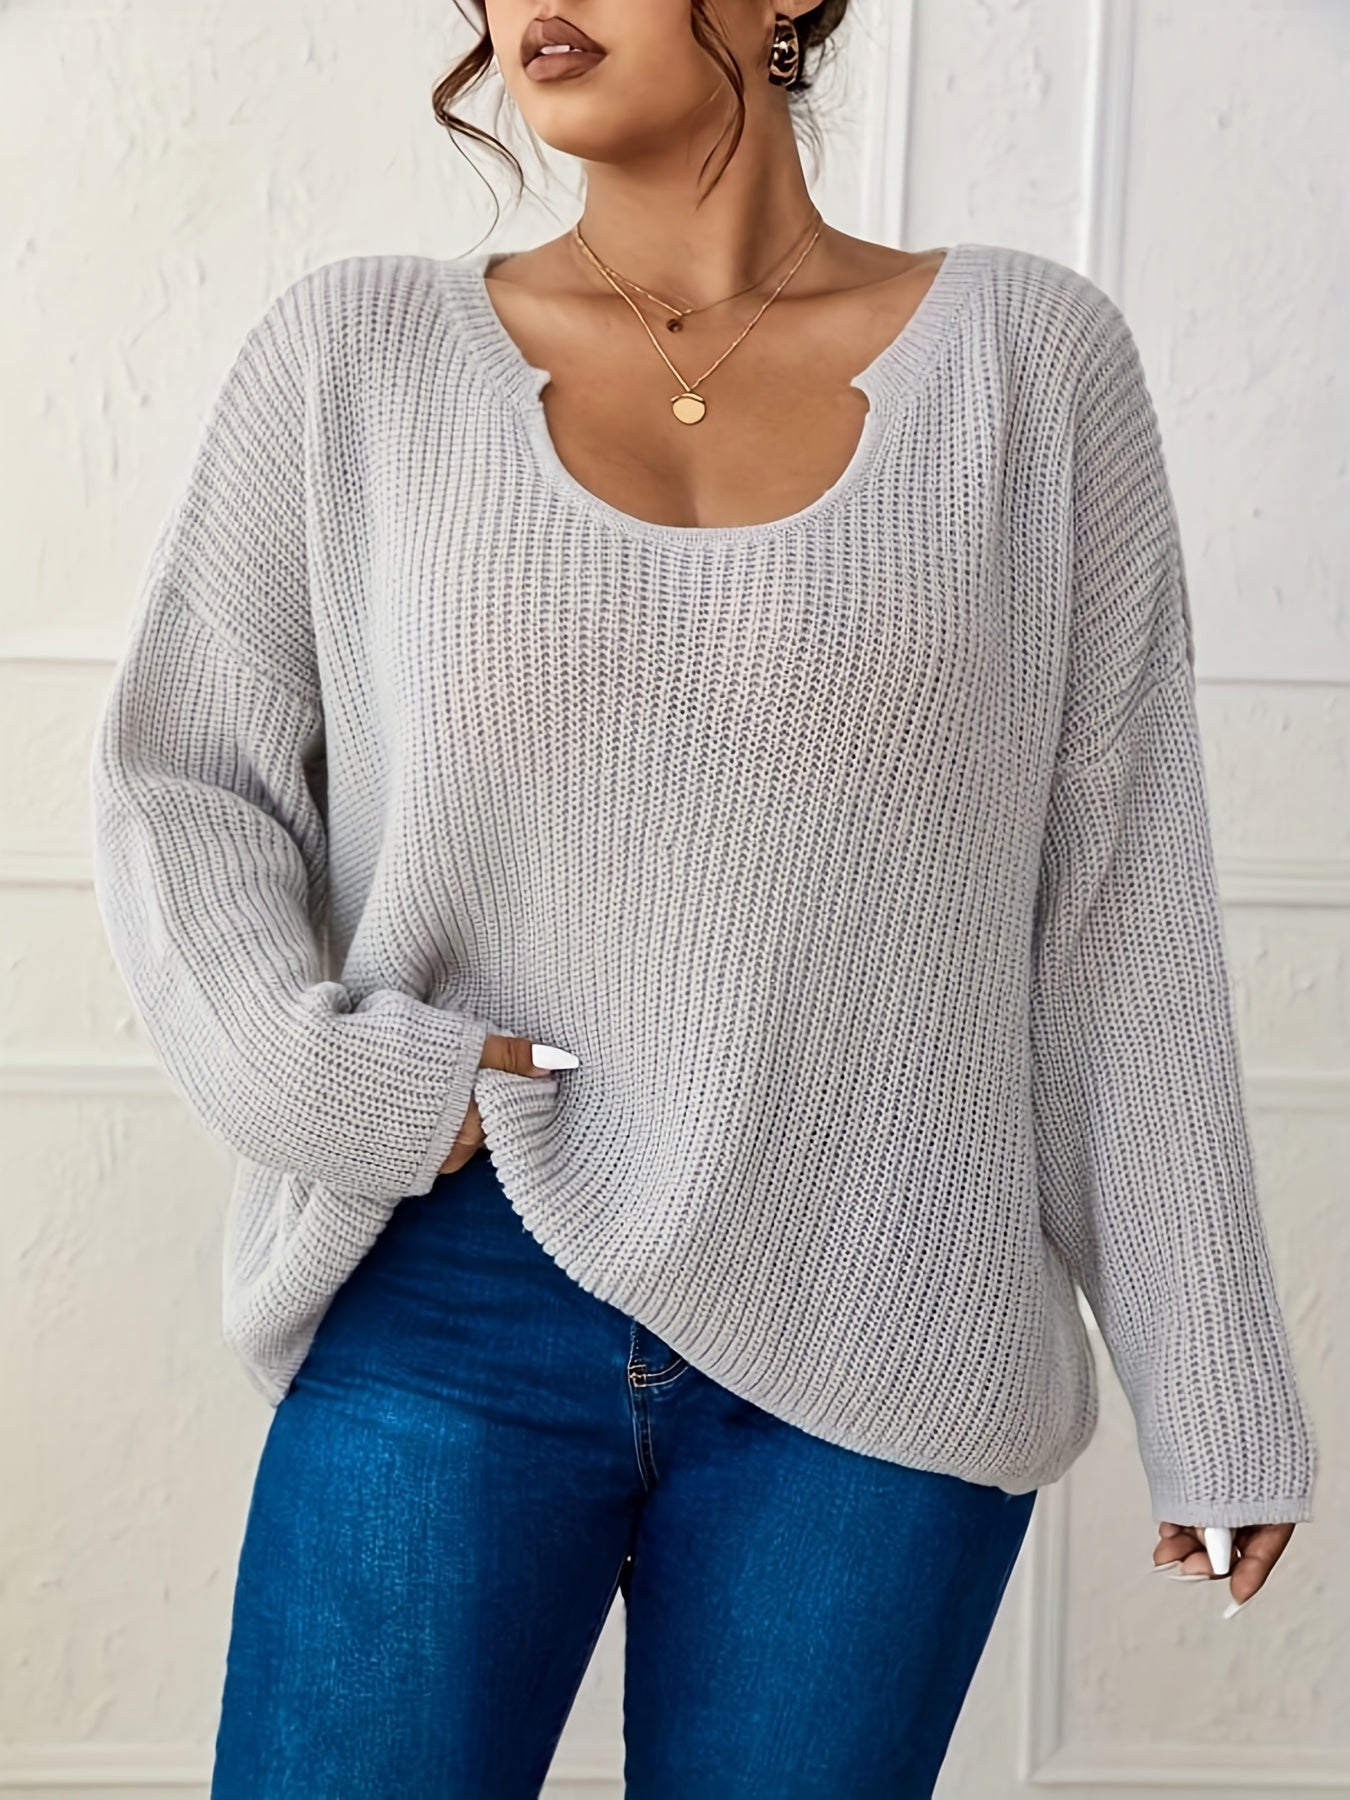 Antmvs Plus Size Casual Knit Top, Women's Plus Notched Neck Long Sleeve Drop Shoulder Slight Stretch Pullover Top